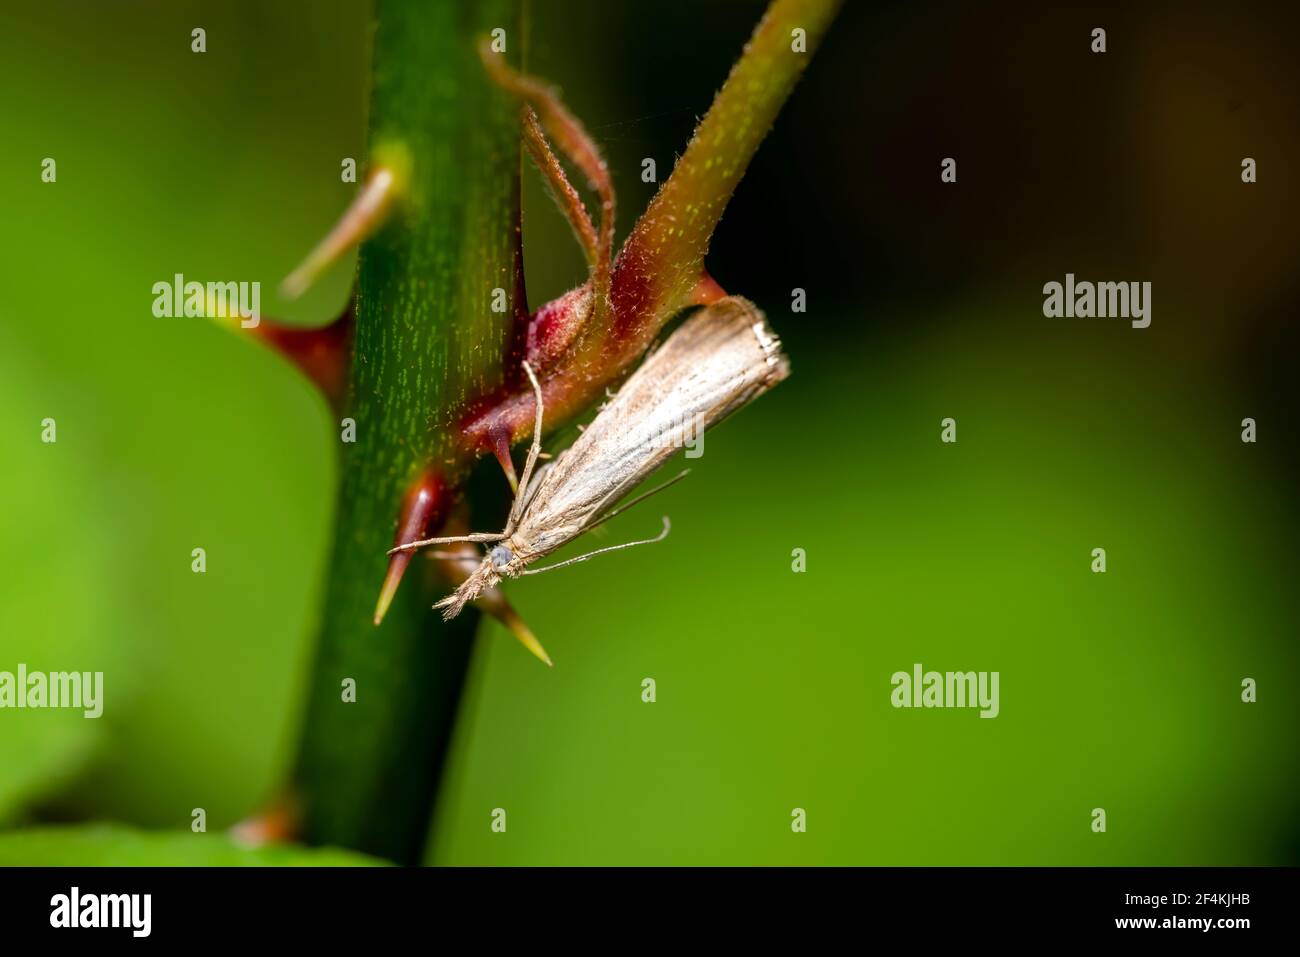 A small grass moth of the crambidae family resting on a grass plant which is a white brown insect flying in spring and summer, stock photo image Stock Photo